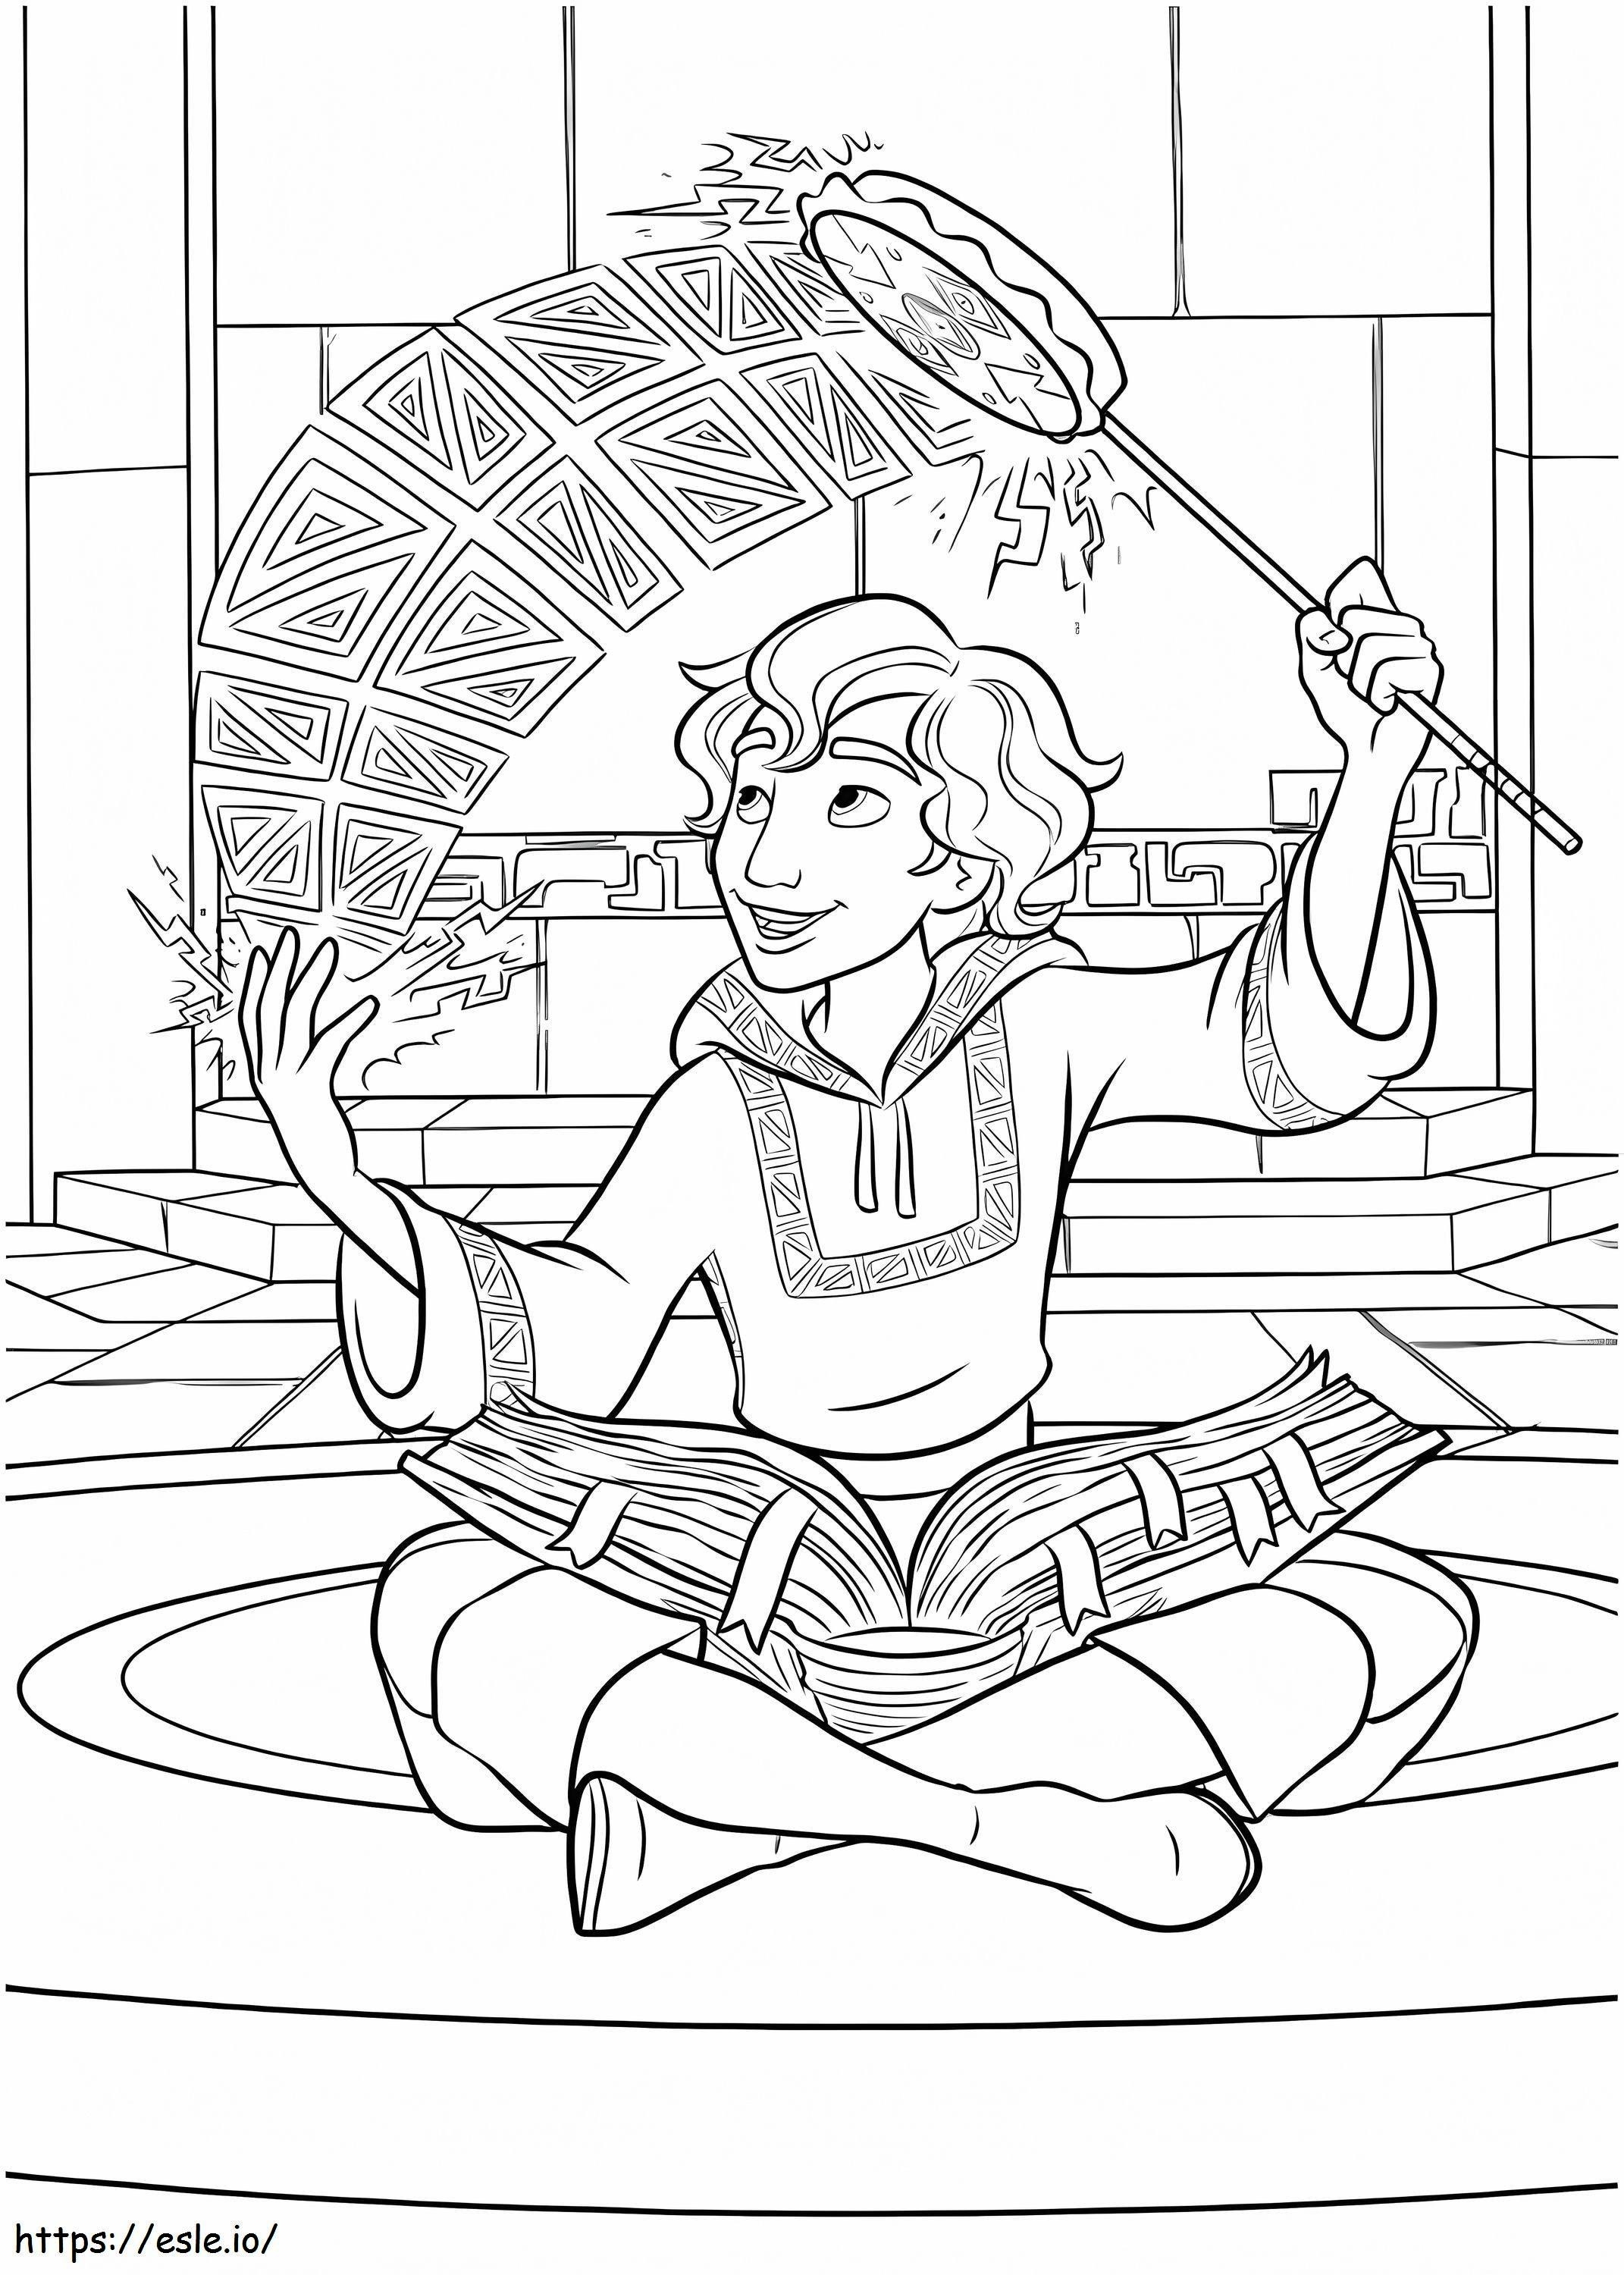 1566028582 Mateo And Magic A4 coloring page